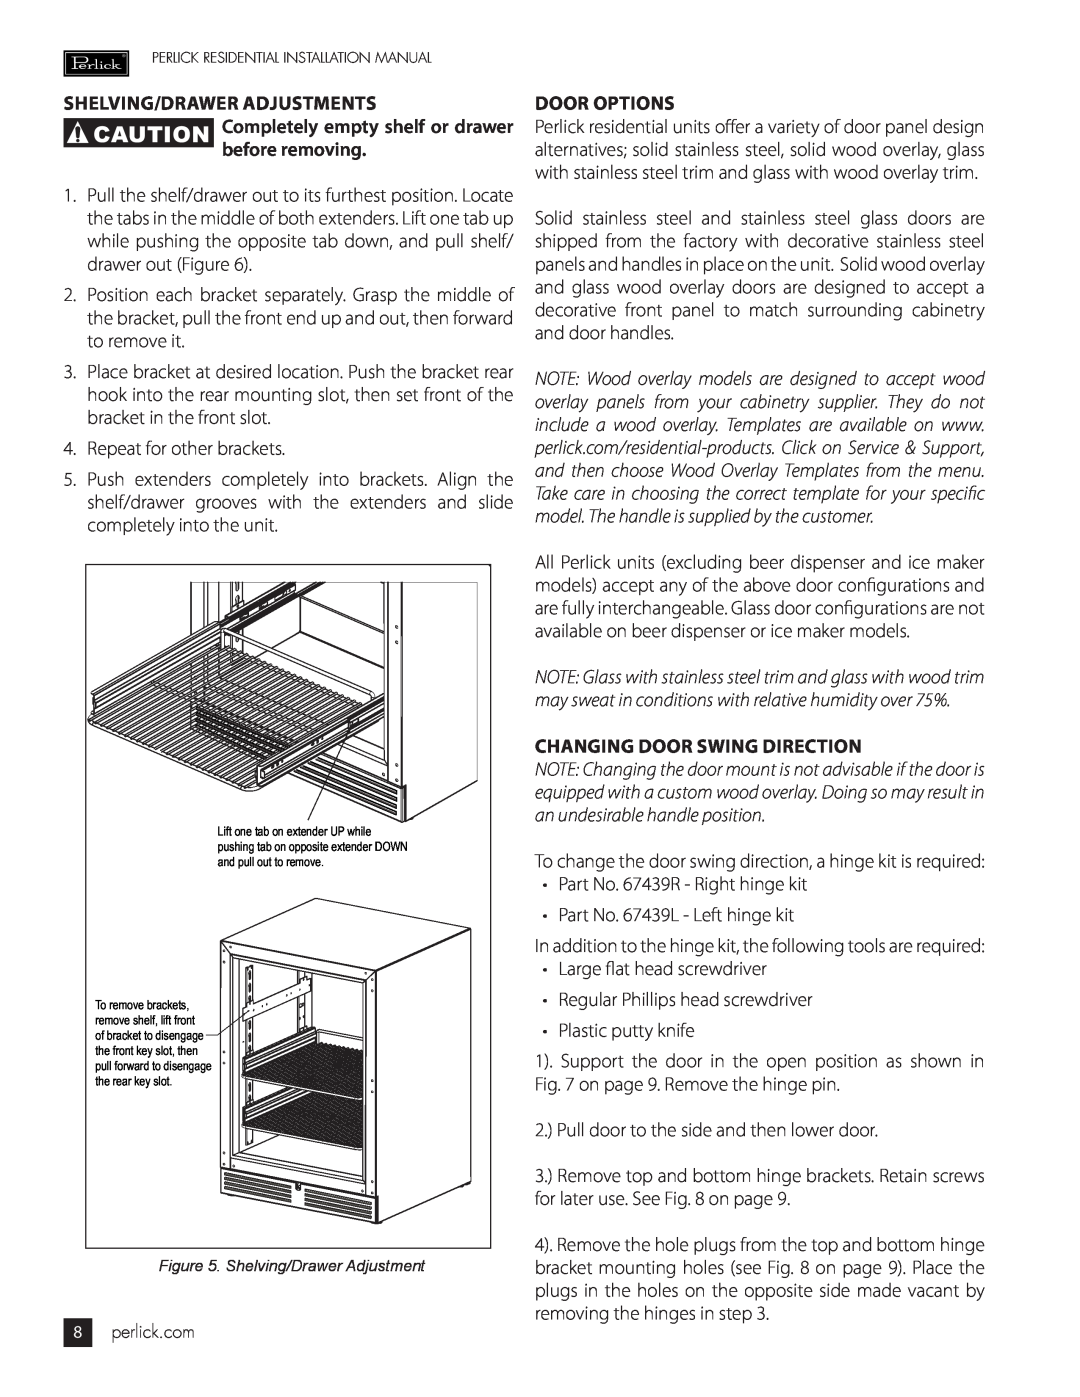 Perlick HP24, HH24 Shelving/Drawer Adjustments, CAUTION Completely empty shelf or drawer before removing, Door Options 